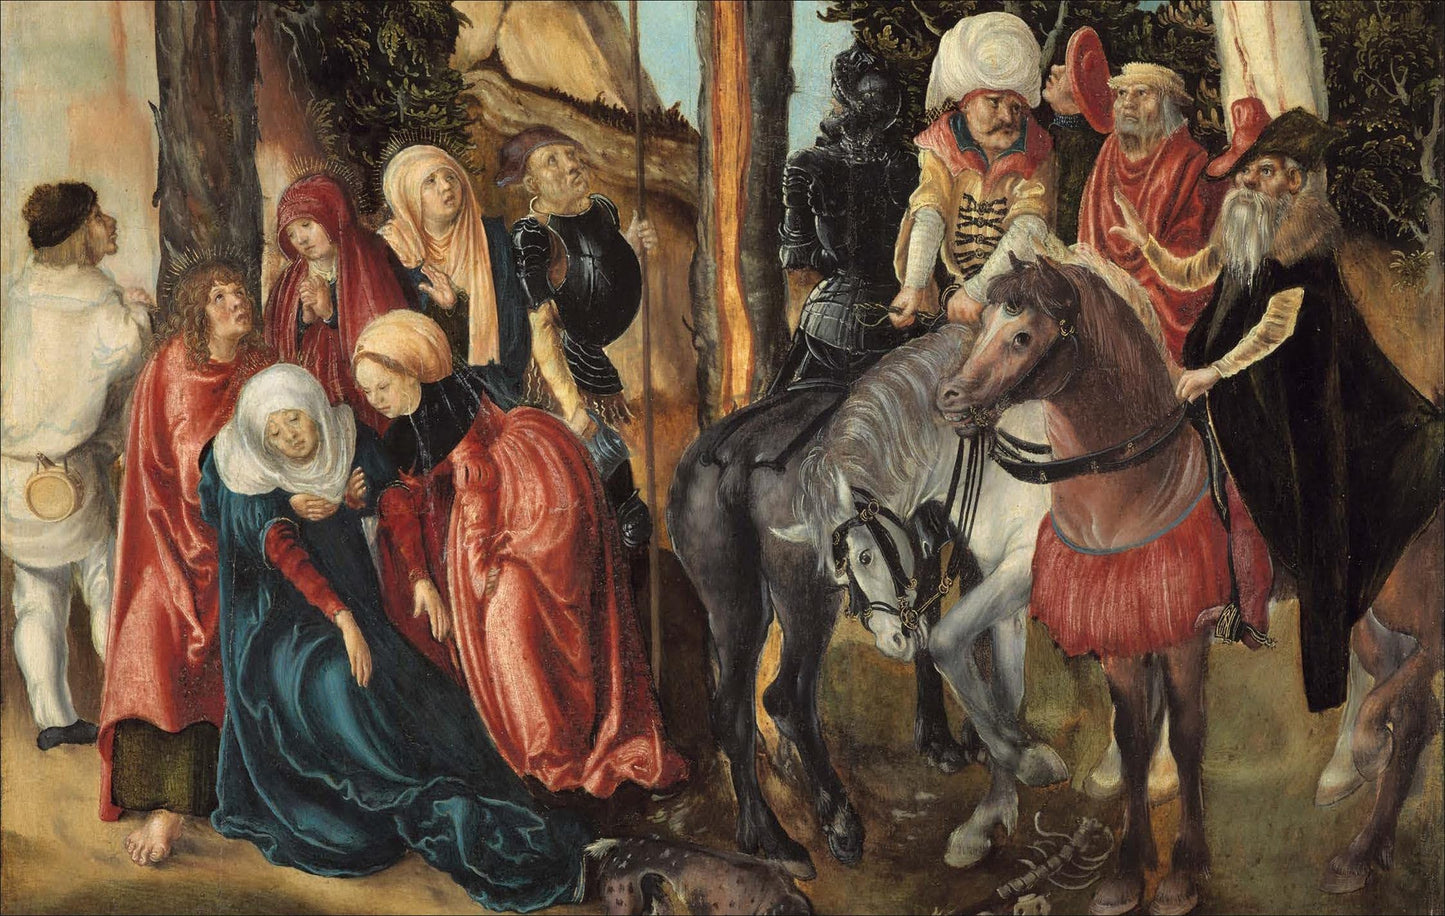 Cranach: The Early Years in Vienna